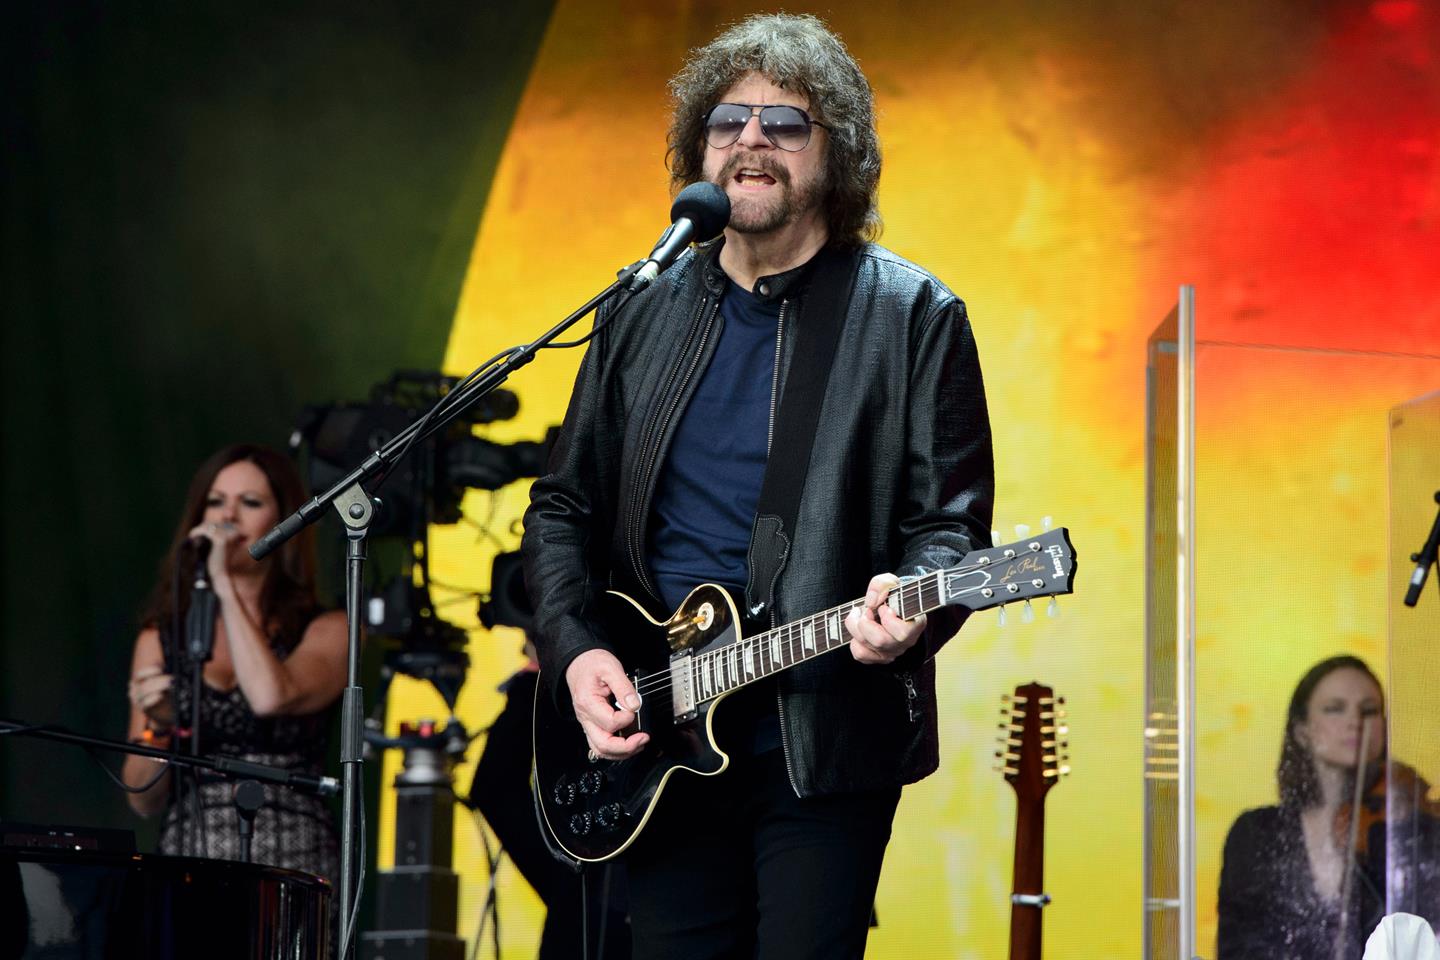 electric light orchestra on tour